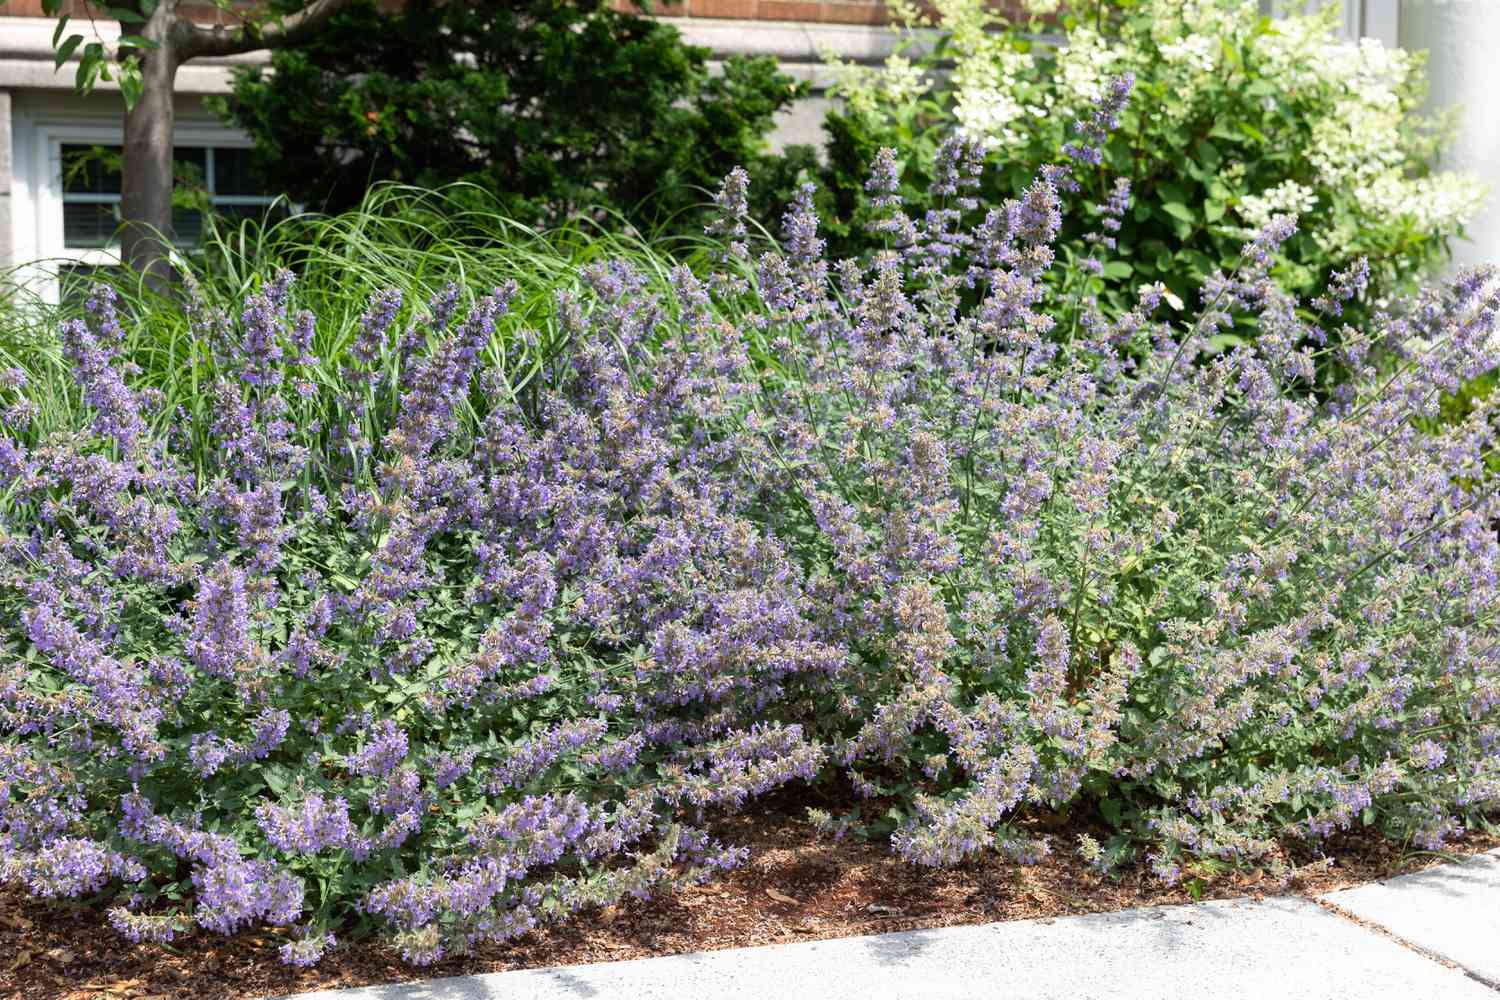 catmint used as edging in a garden